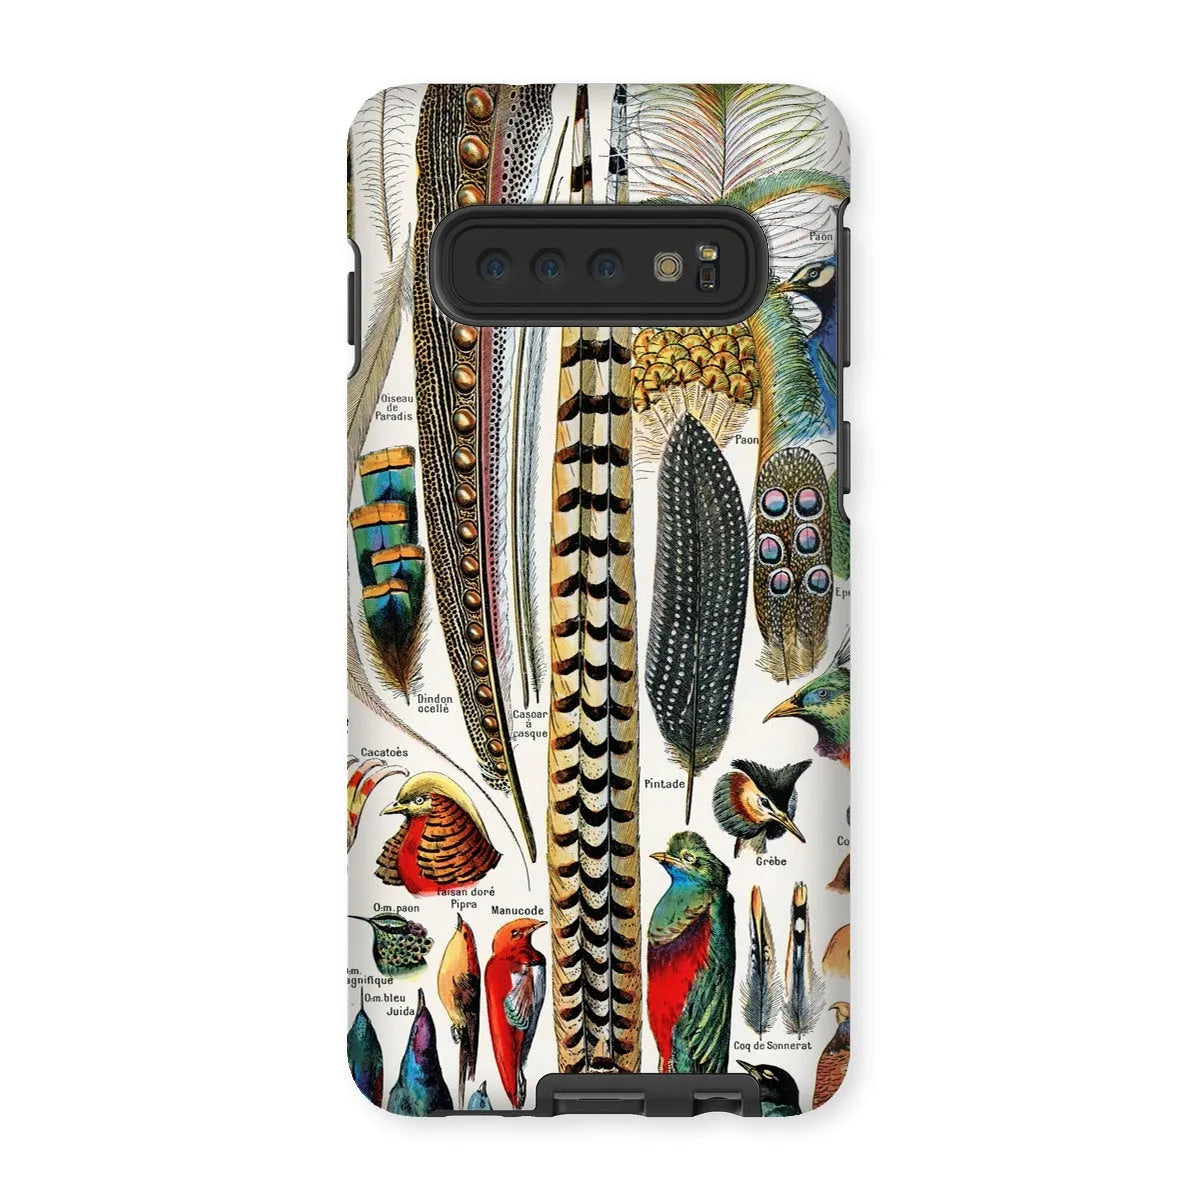 Plumes - Feathers By Adolphe Millot Tough Phone Case - Samsung Galaxy S10 / Matte - Aesthetic Art